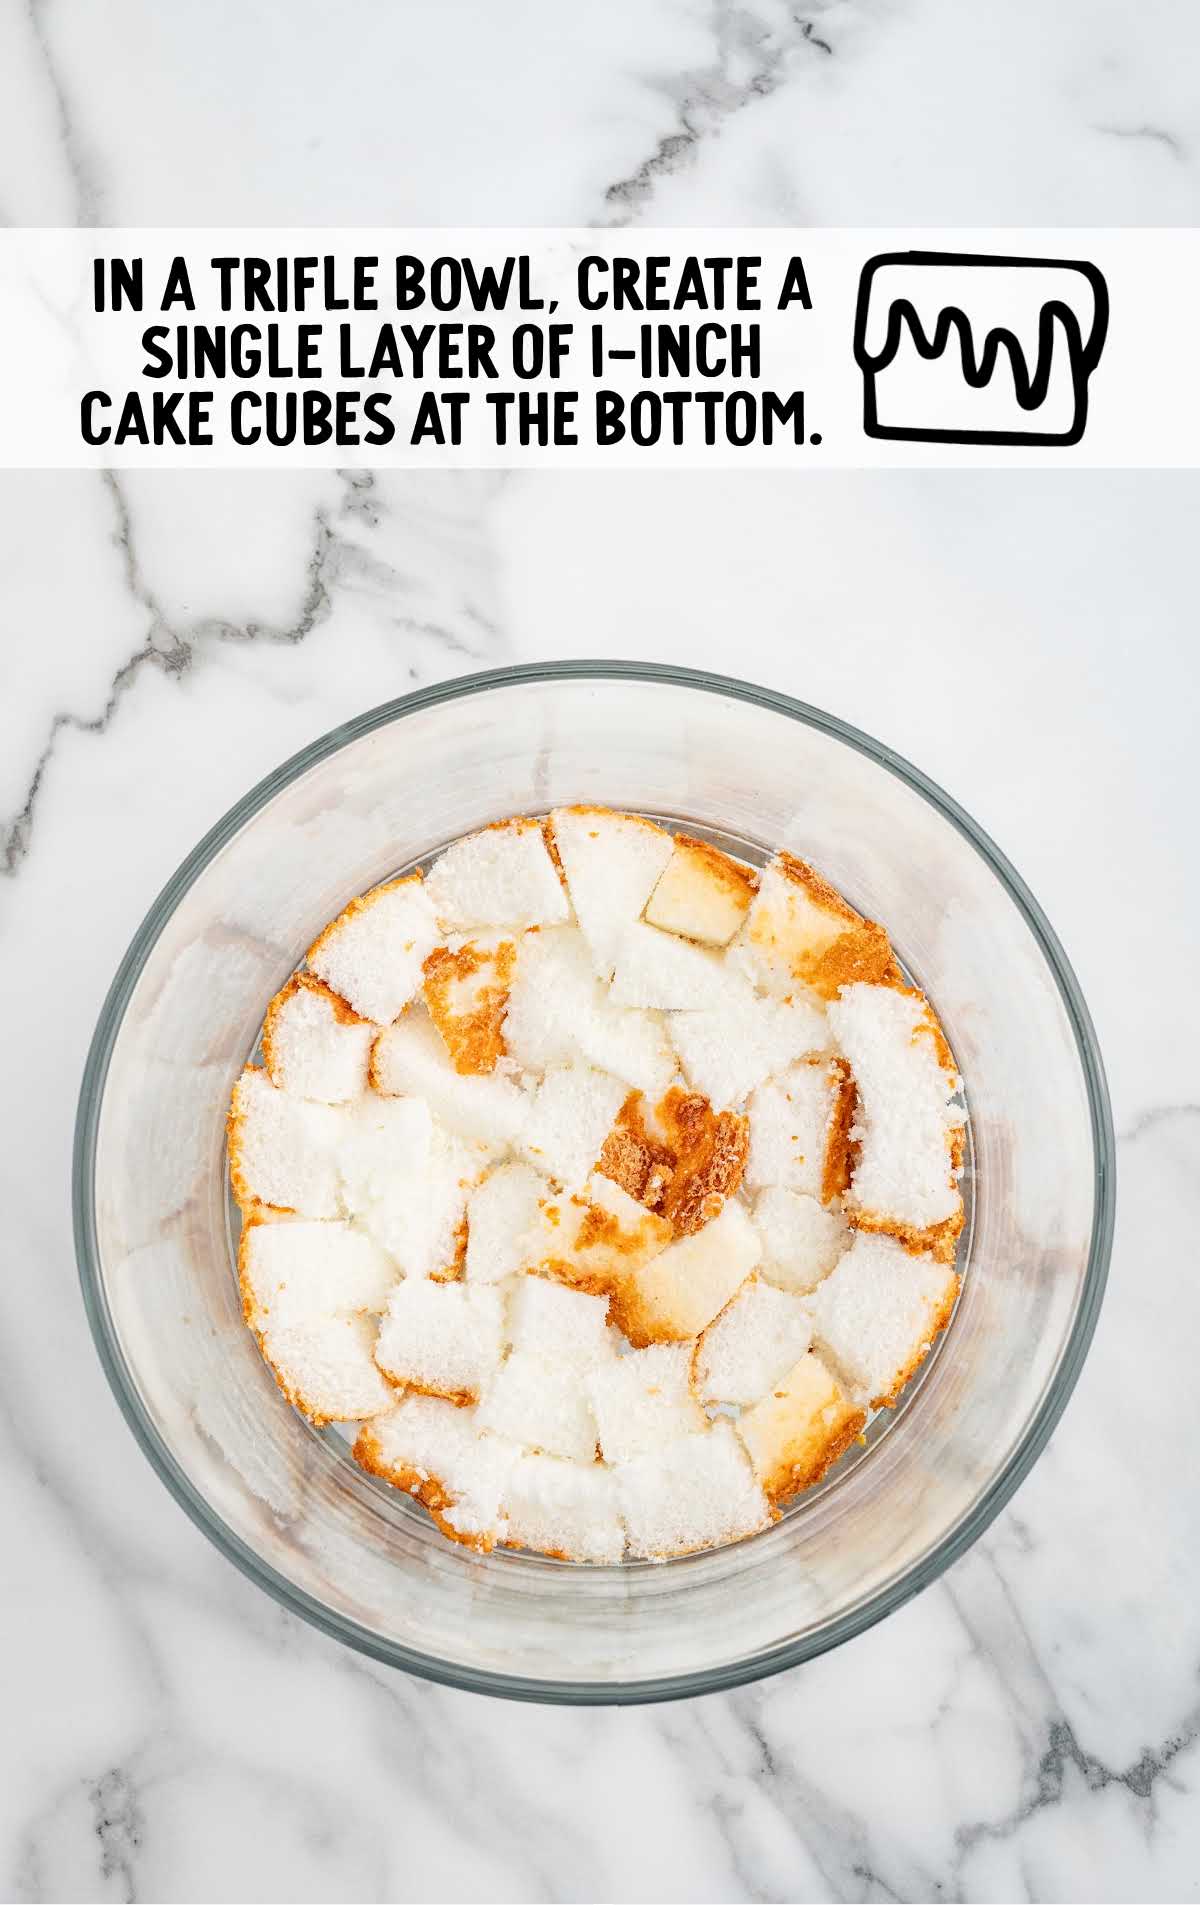 cake cubes placed at the bottom of the trifle jar